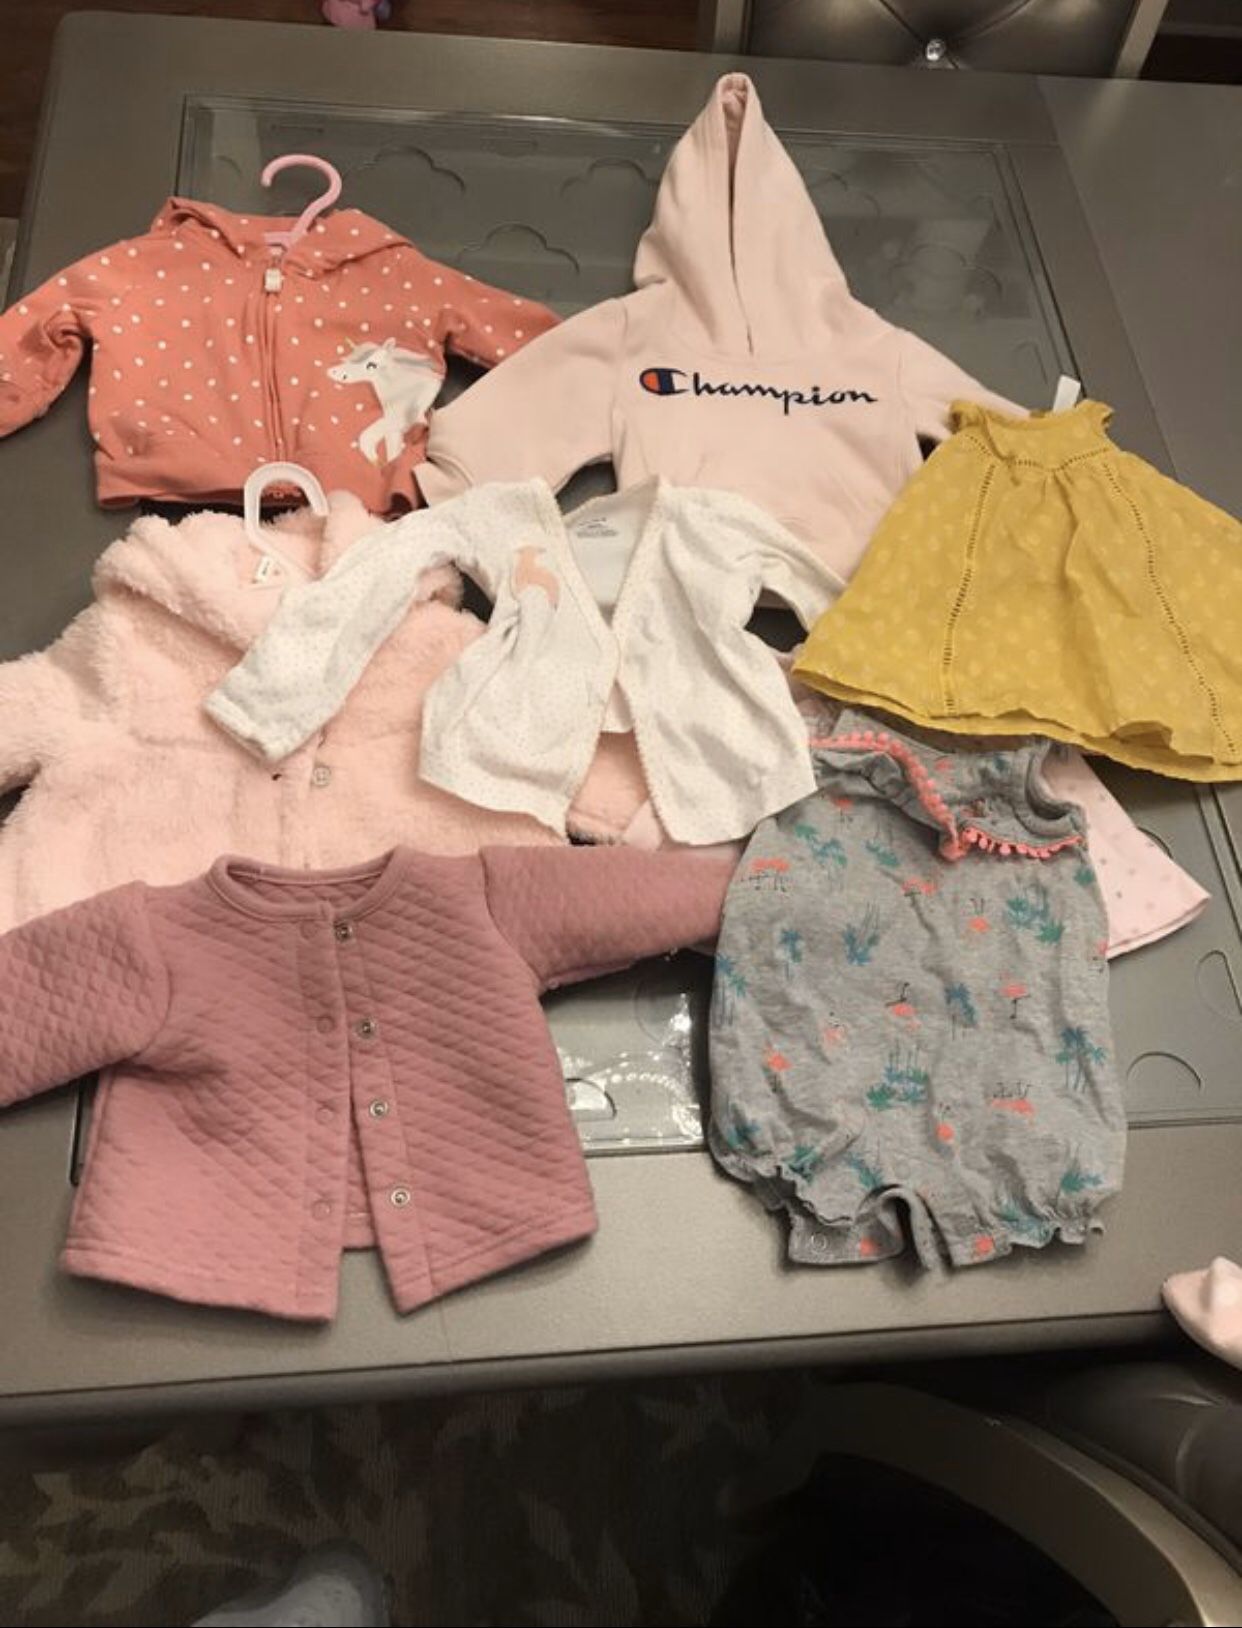 Baby clothes and teddy bears